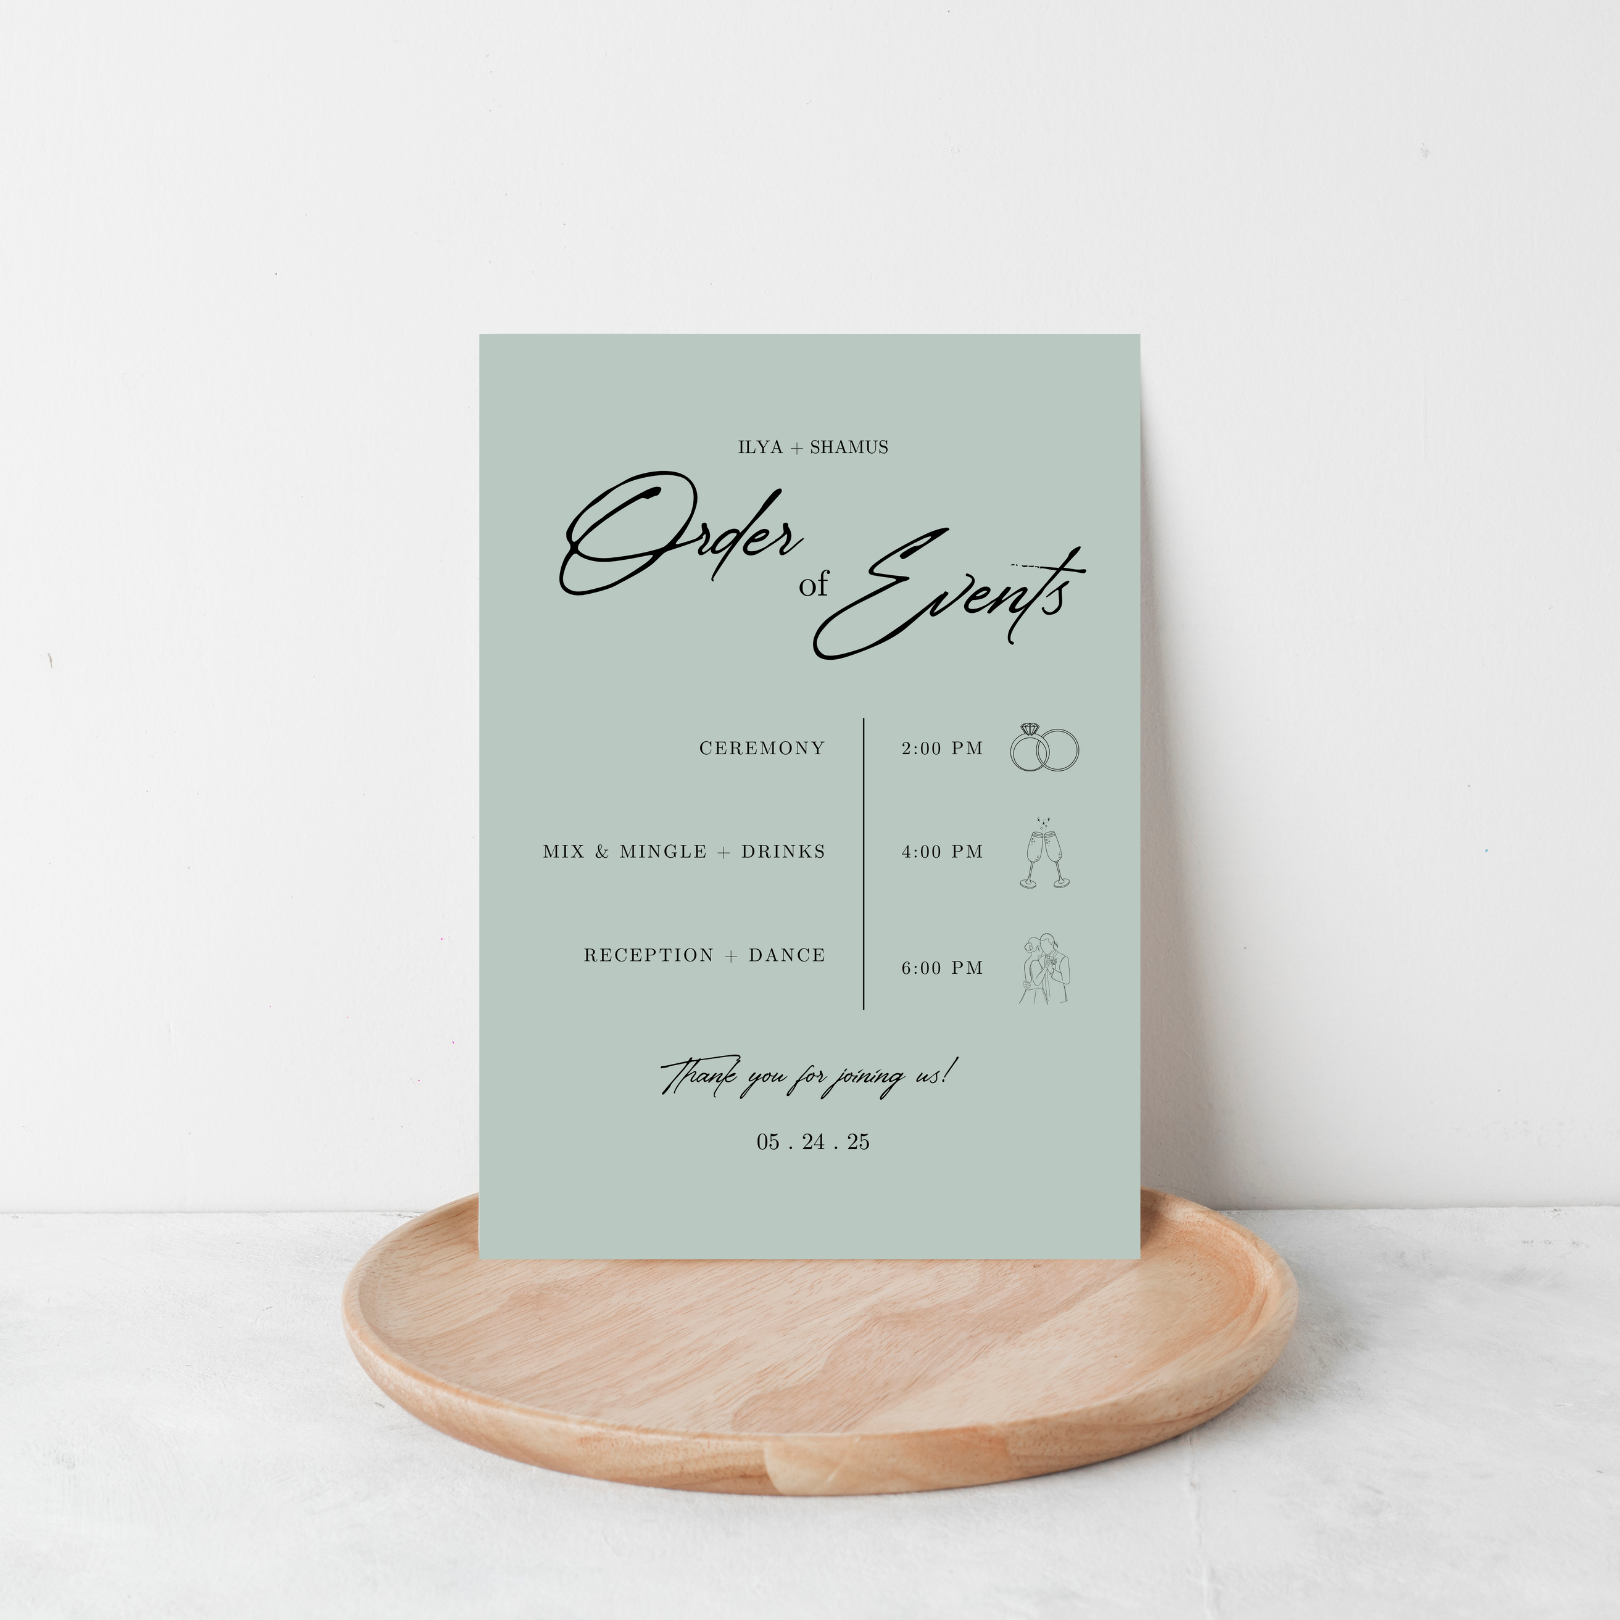 A mint green wedding program with black text stands on a light-coloured wooden plate against a white background.